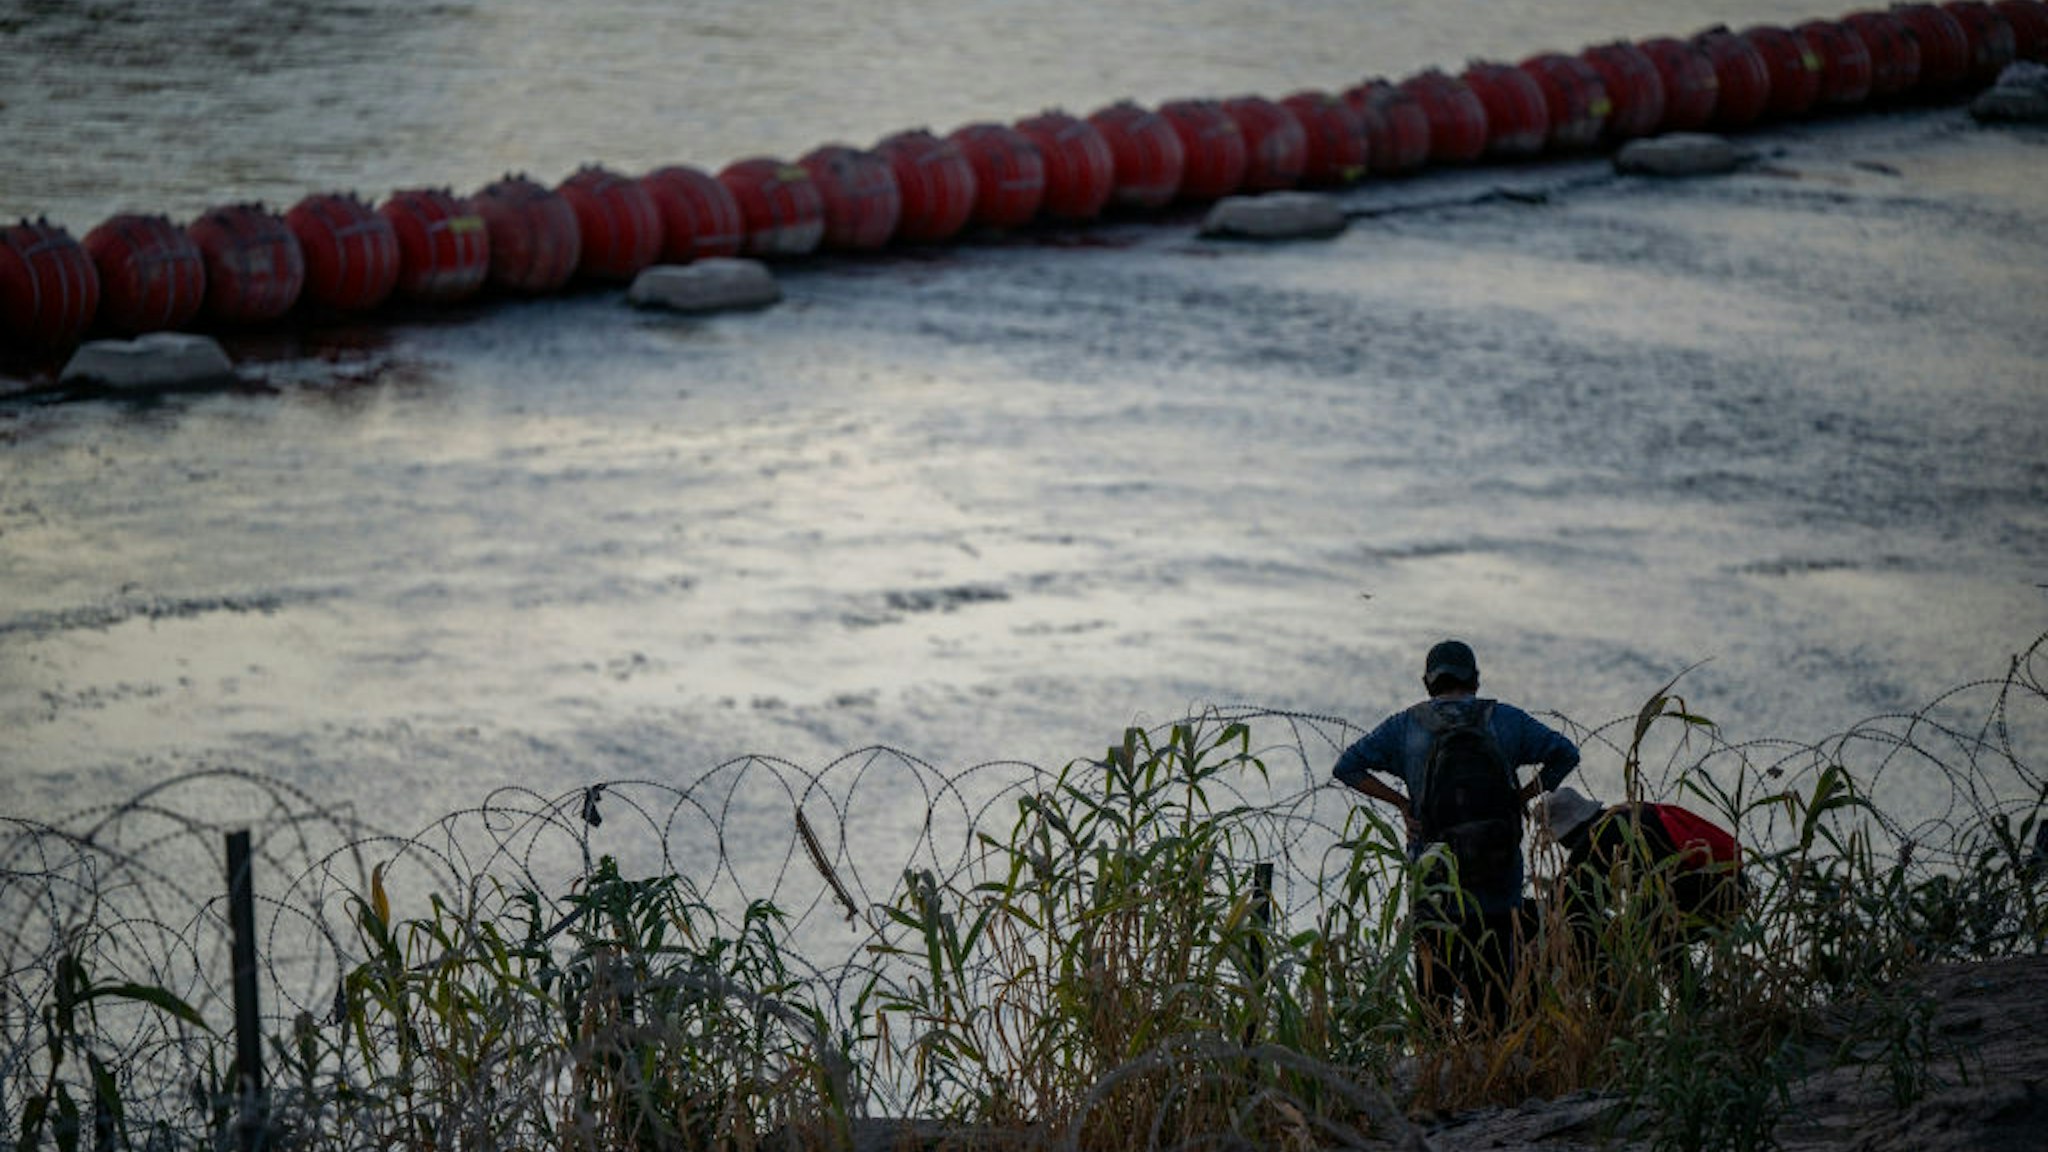 EAGLE PASS, TEXAS - SEPTEMBER 11: Migrants help each other through barbed-wire fencing after crossing the Rio Grande river near the buoy barriers on September 11, 2023 in Eagle Pass, Texas. The Court of Appeals have temporarily halted removal of the floating buoy barriers located in the river. The buoys have sparked controversy and tension amongst the United States and Mexico as claims of violating human rights have reached congress. The Department of Justice has filed a lawsuit against the state of Texas as Gov. Greg Abbott has vowed “to take this fight all the way to the U.S. Supreme Court.”